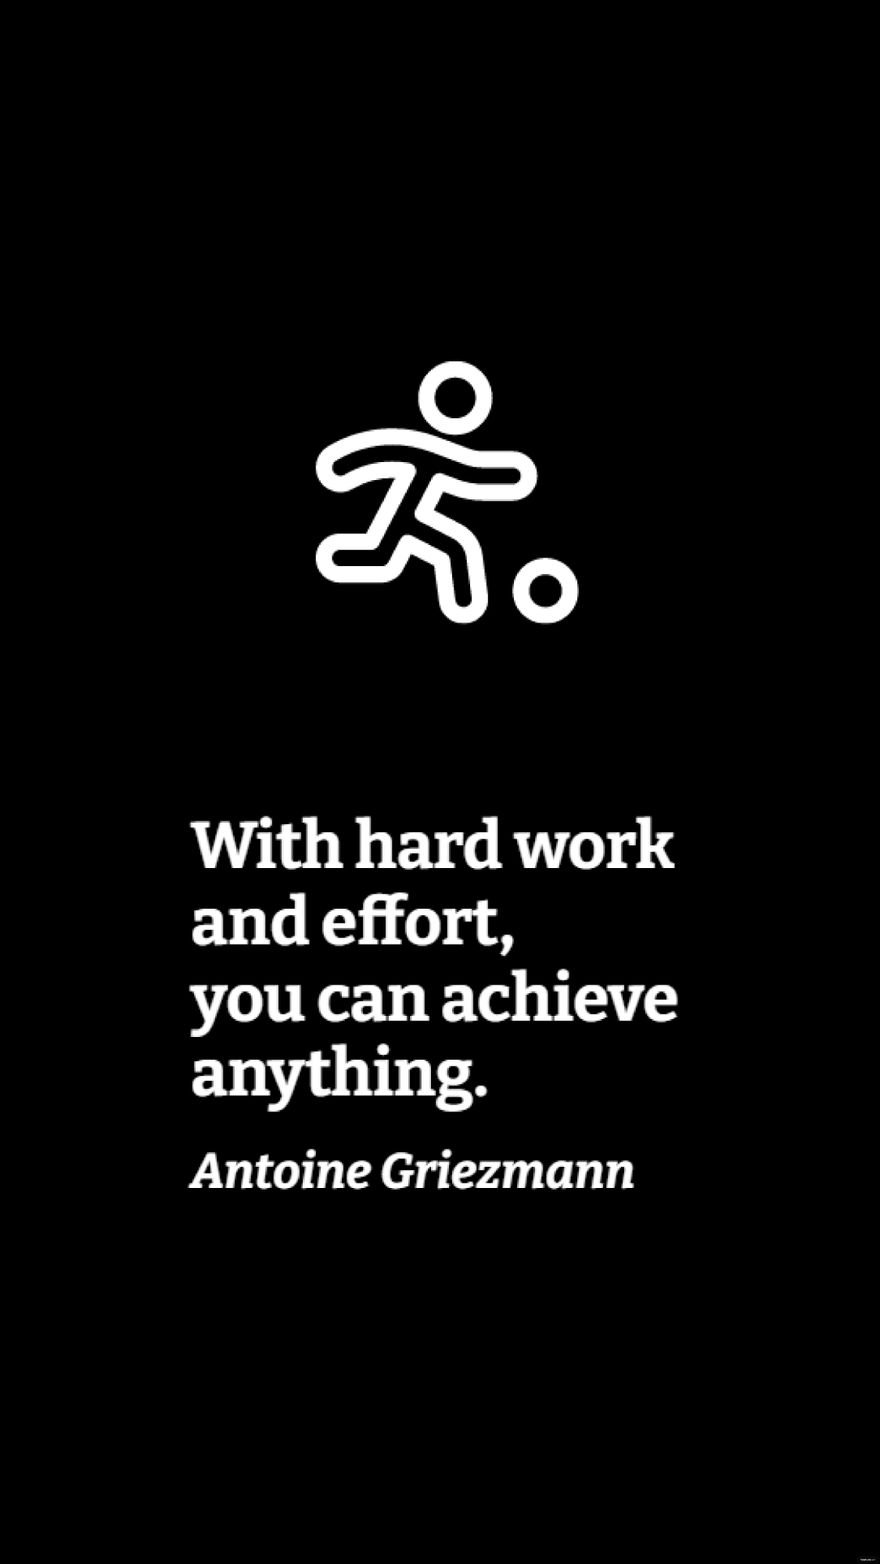 Antoine Griezmann - With hard work and effort, you can achieve anything.